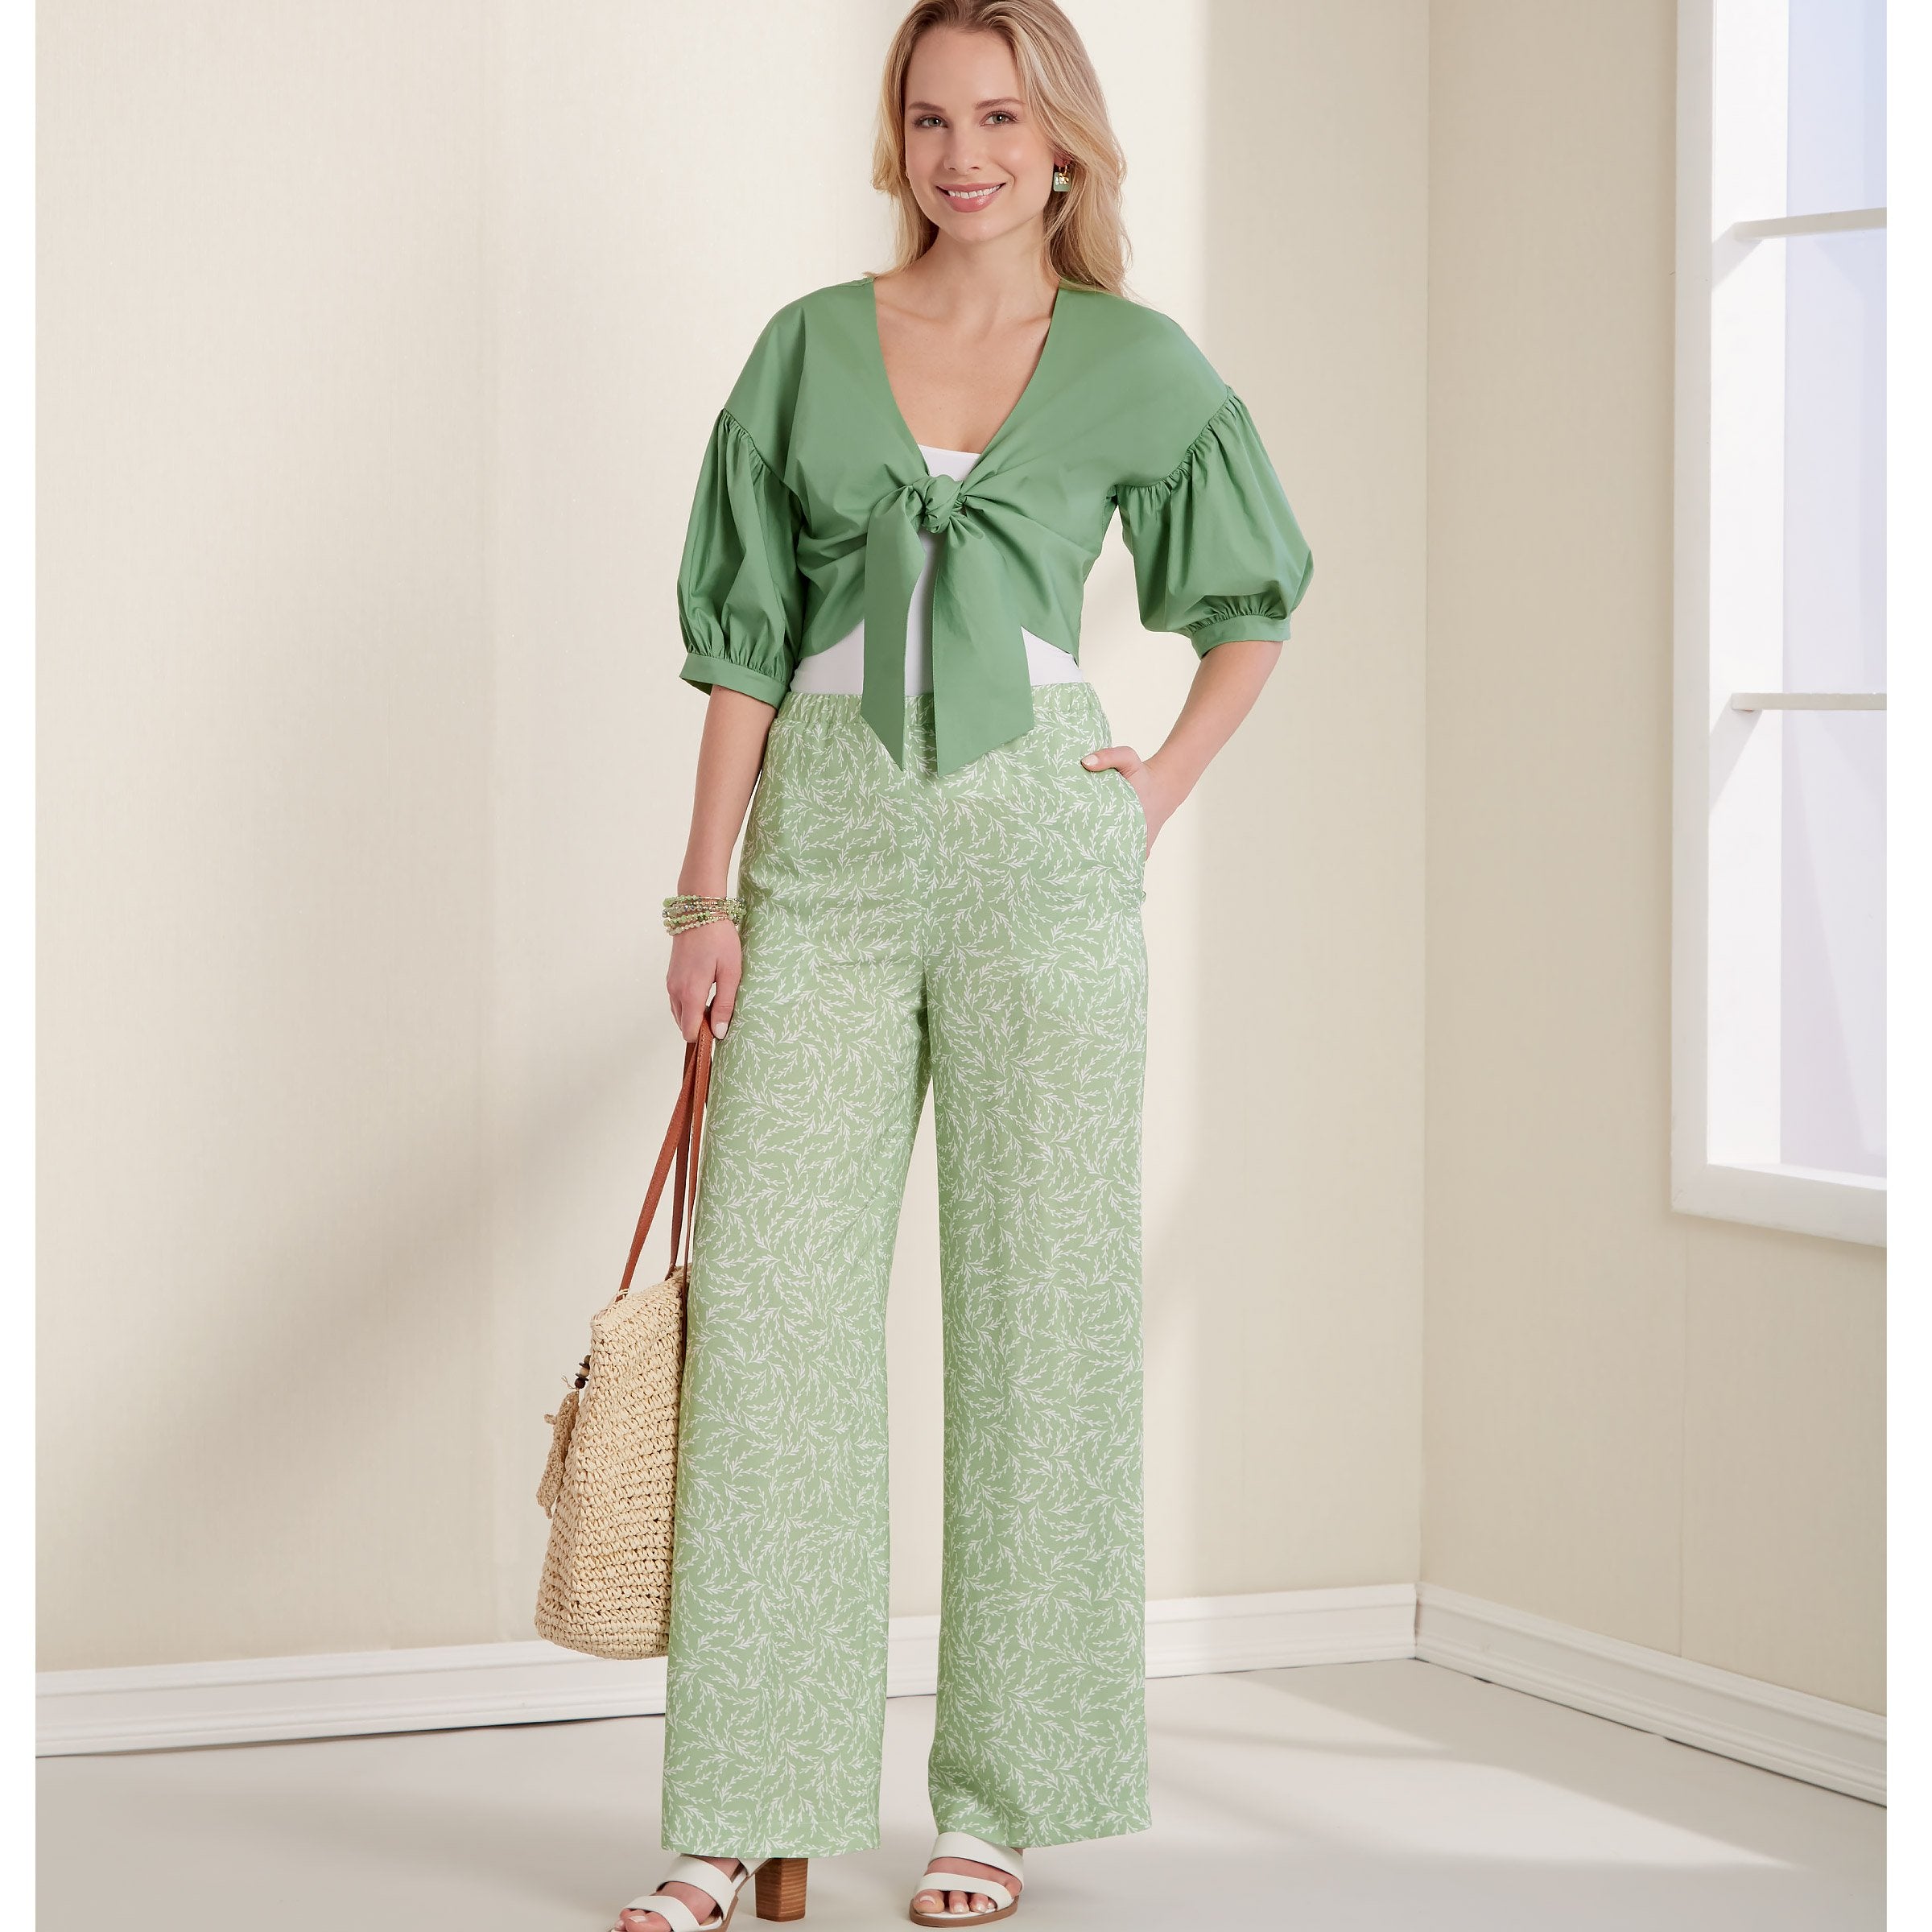 New Look Sewing Pattern 6677 Misses' Cropped Jacket and Trousers from Jaycotts Sewing Supplies